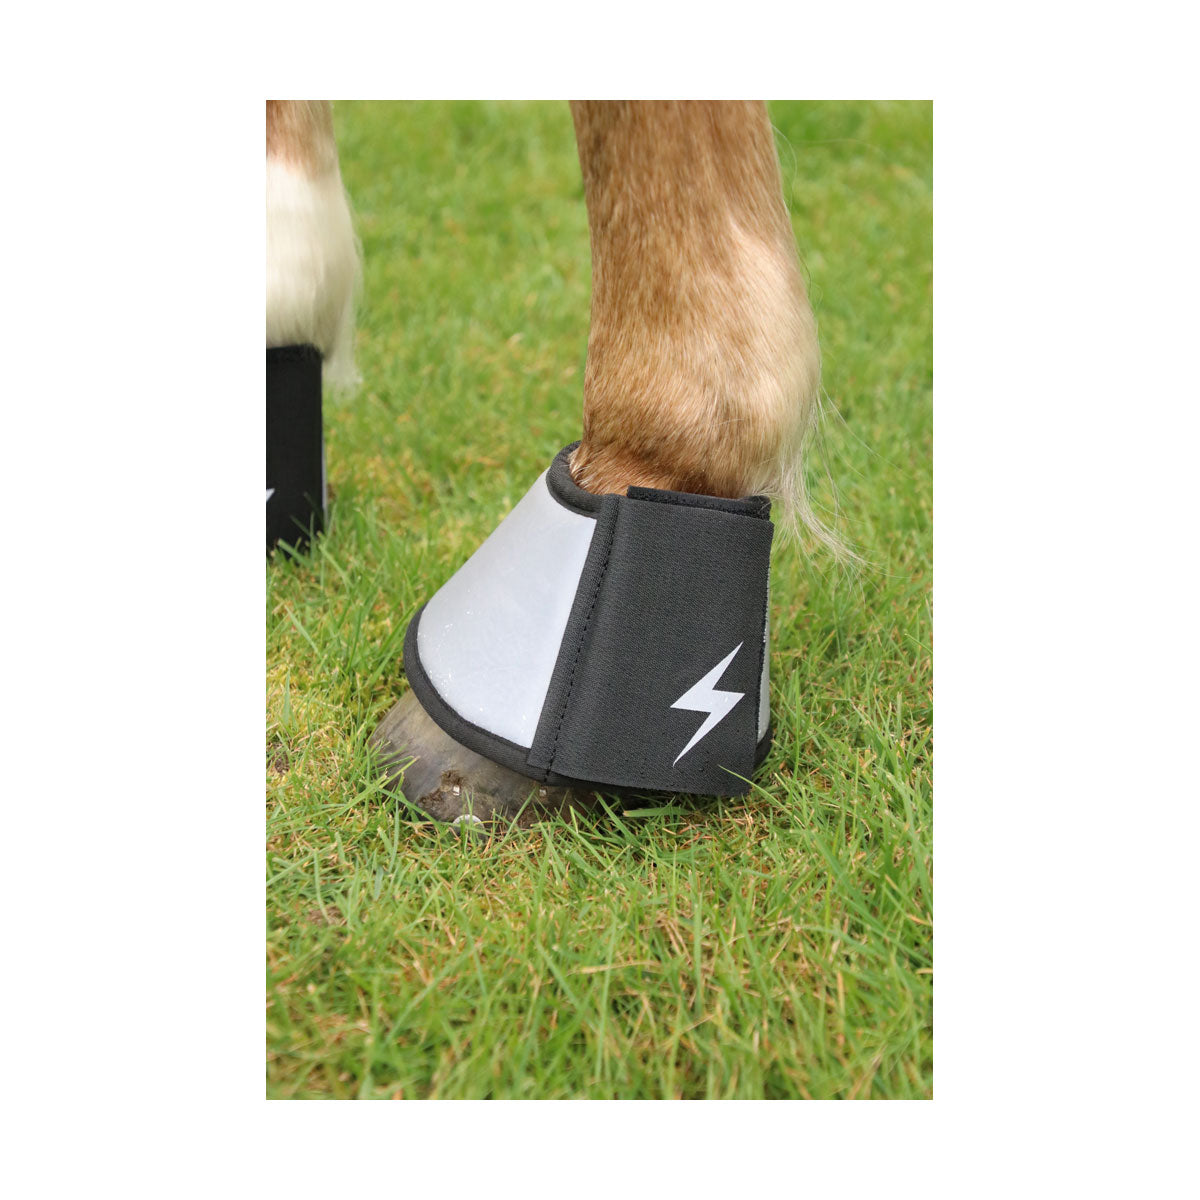 Silva Flash Over Reach Boots by Hy Equestrian